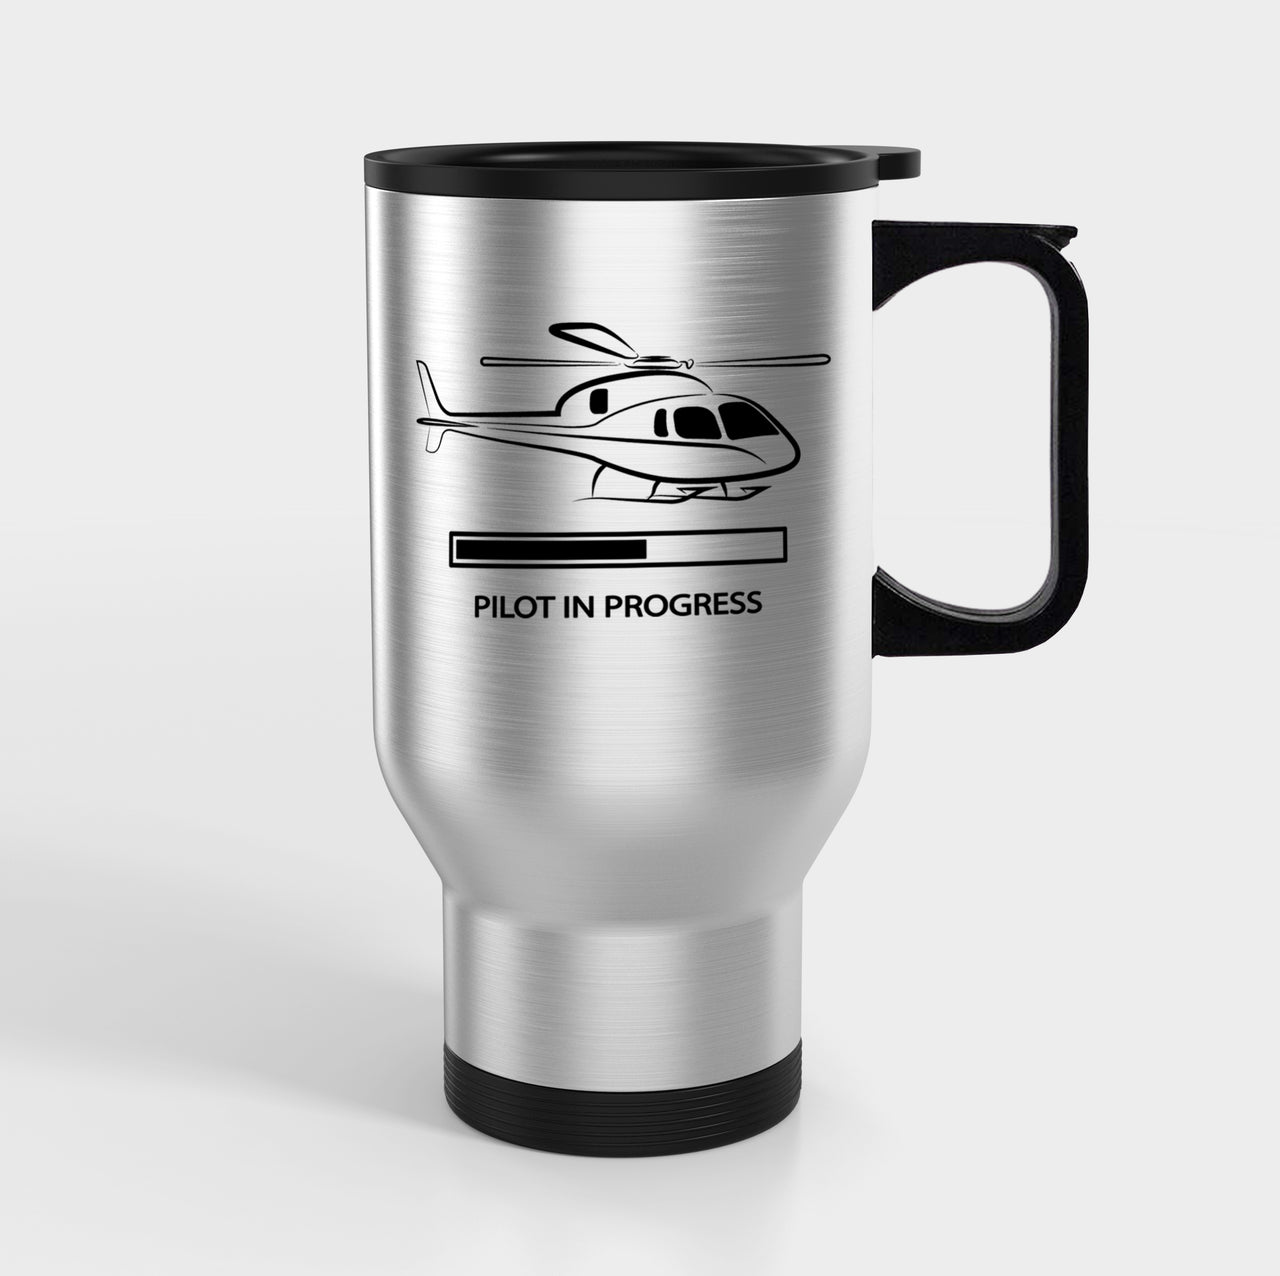 Pilot In Progress (Helicopter) Designed Travel Mugs (With Holder)